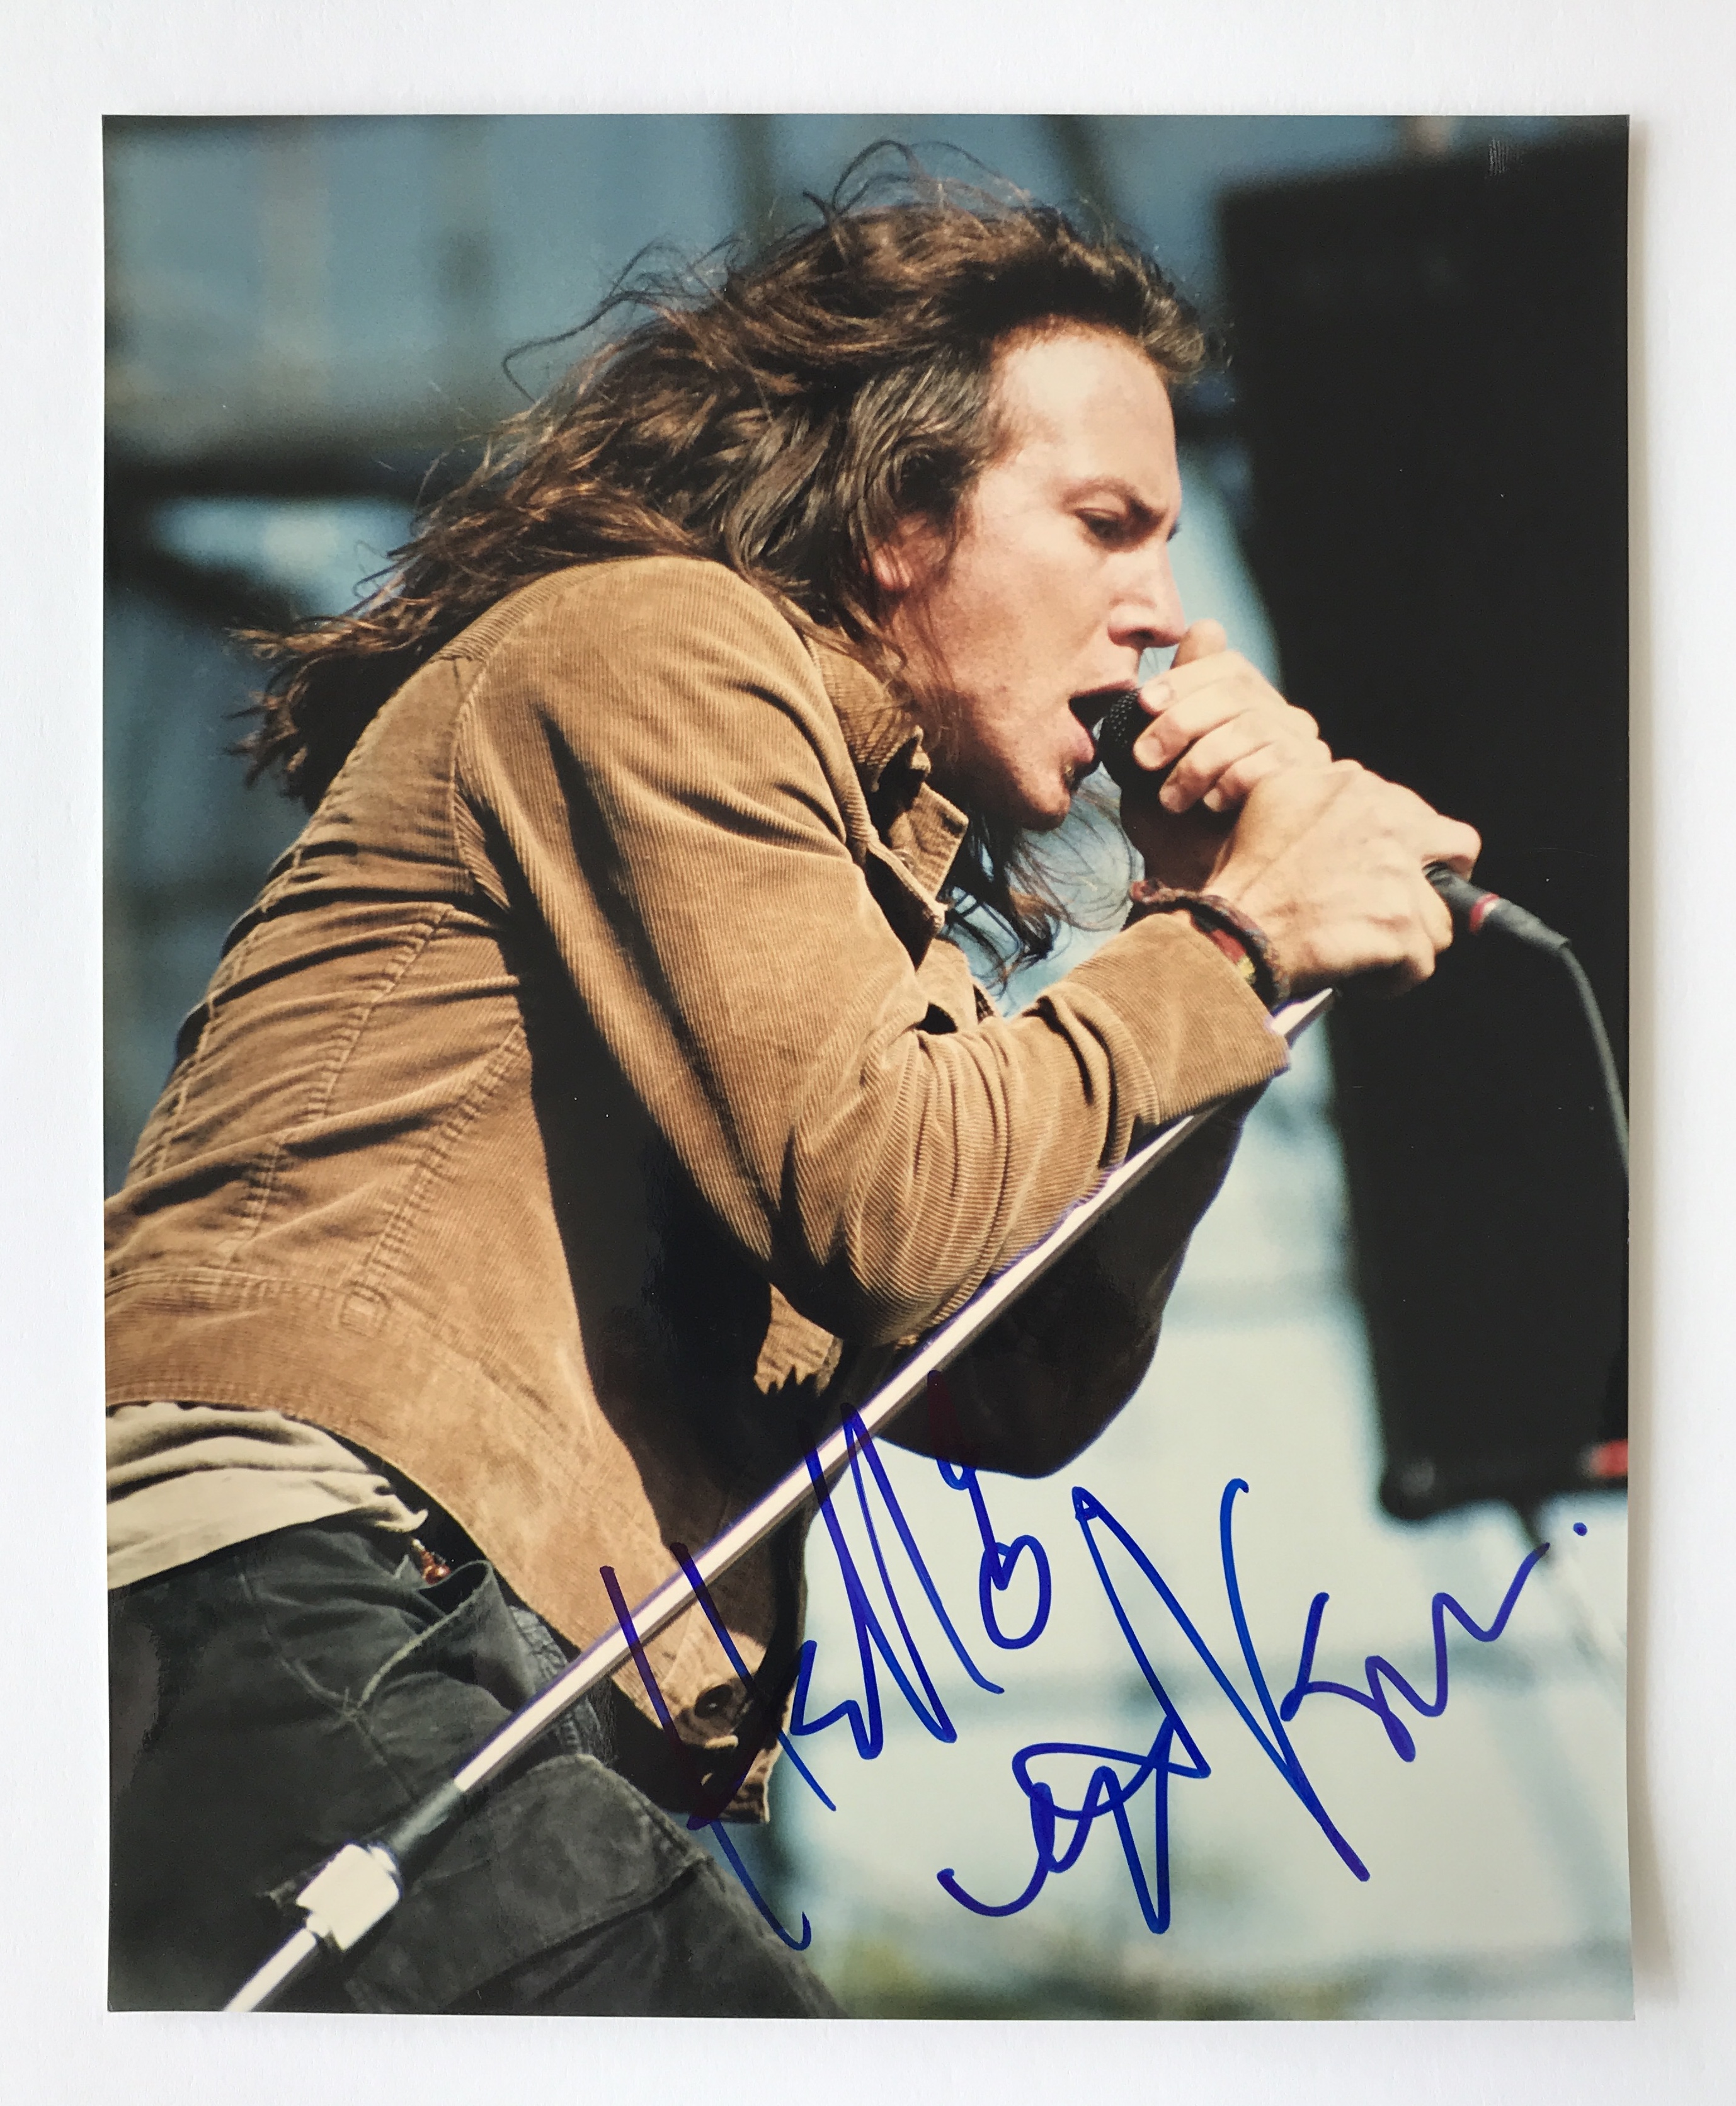 Pearl Jam Band Signed Autographed 8x12 Photograph Eddie Vedder Photo COA